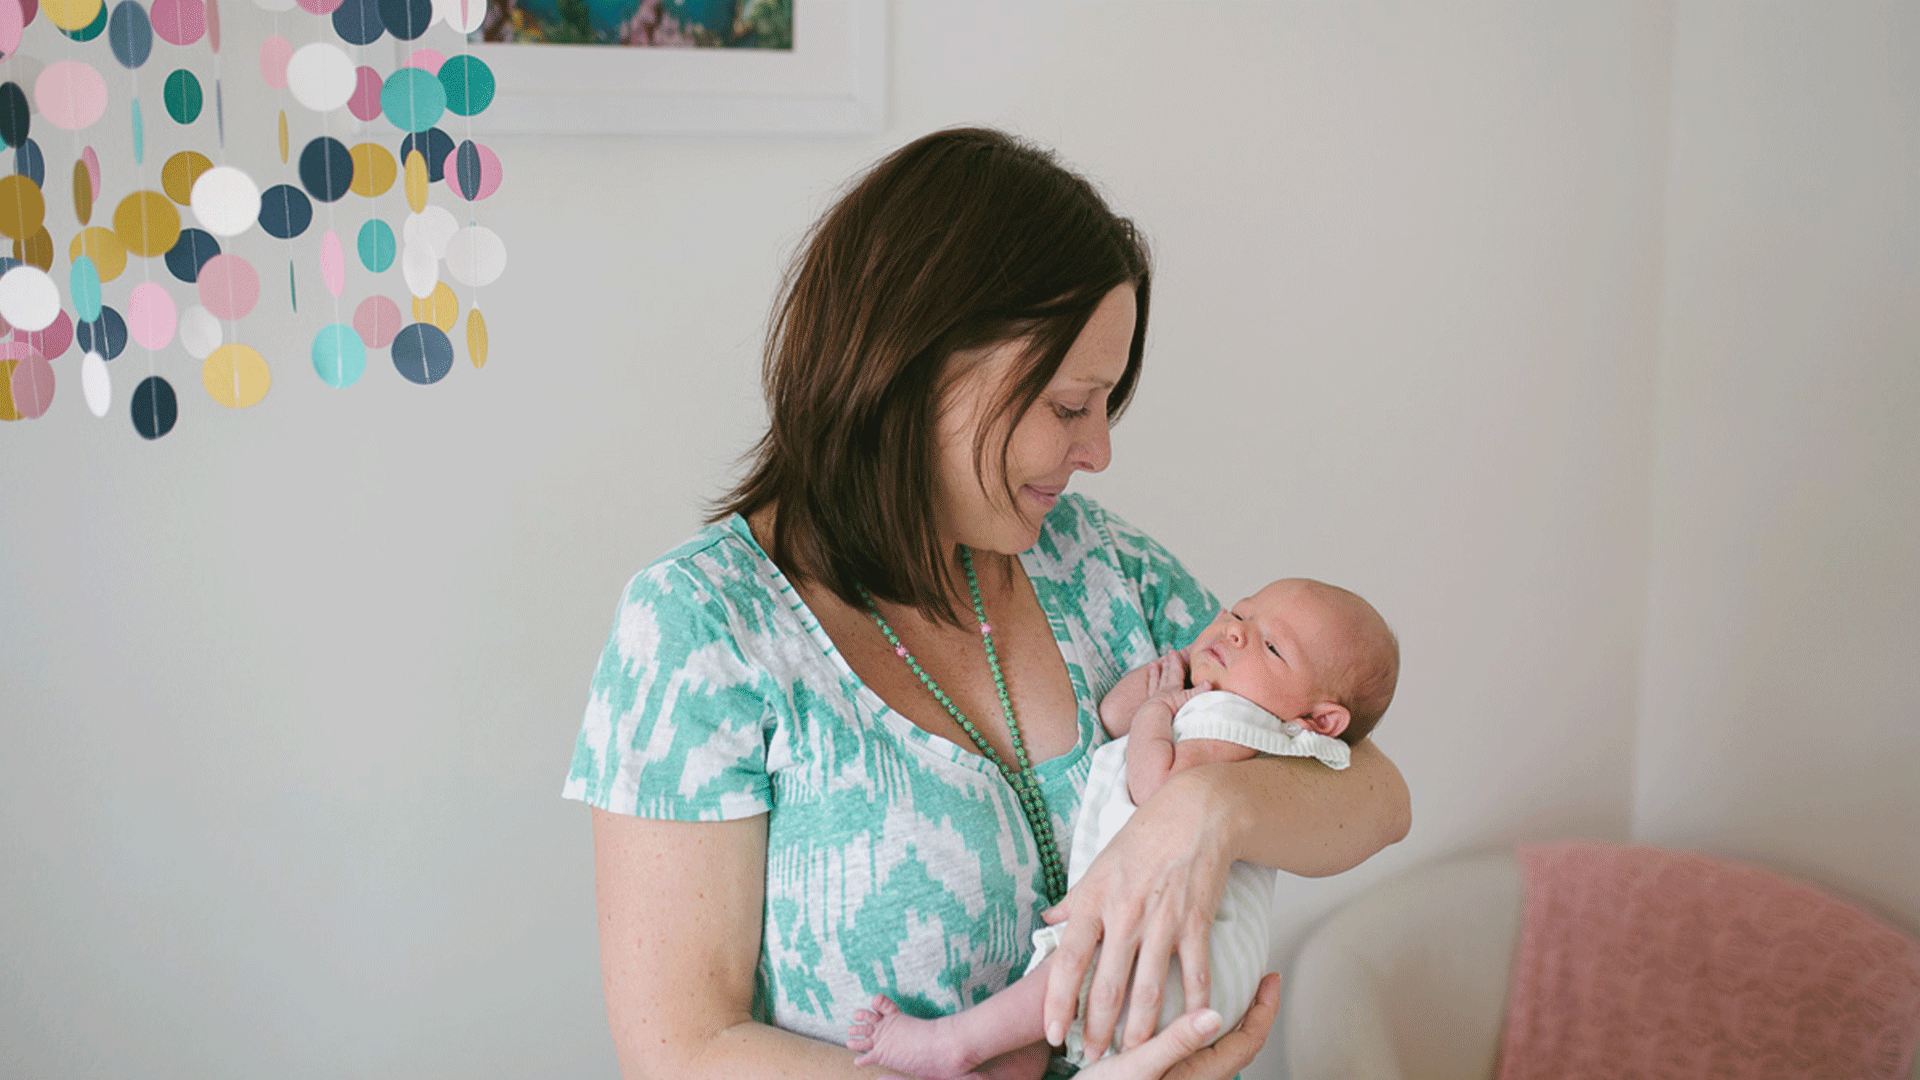 5 Mums Tell Us Their Hopes For Their Babies